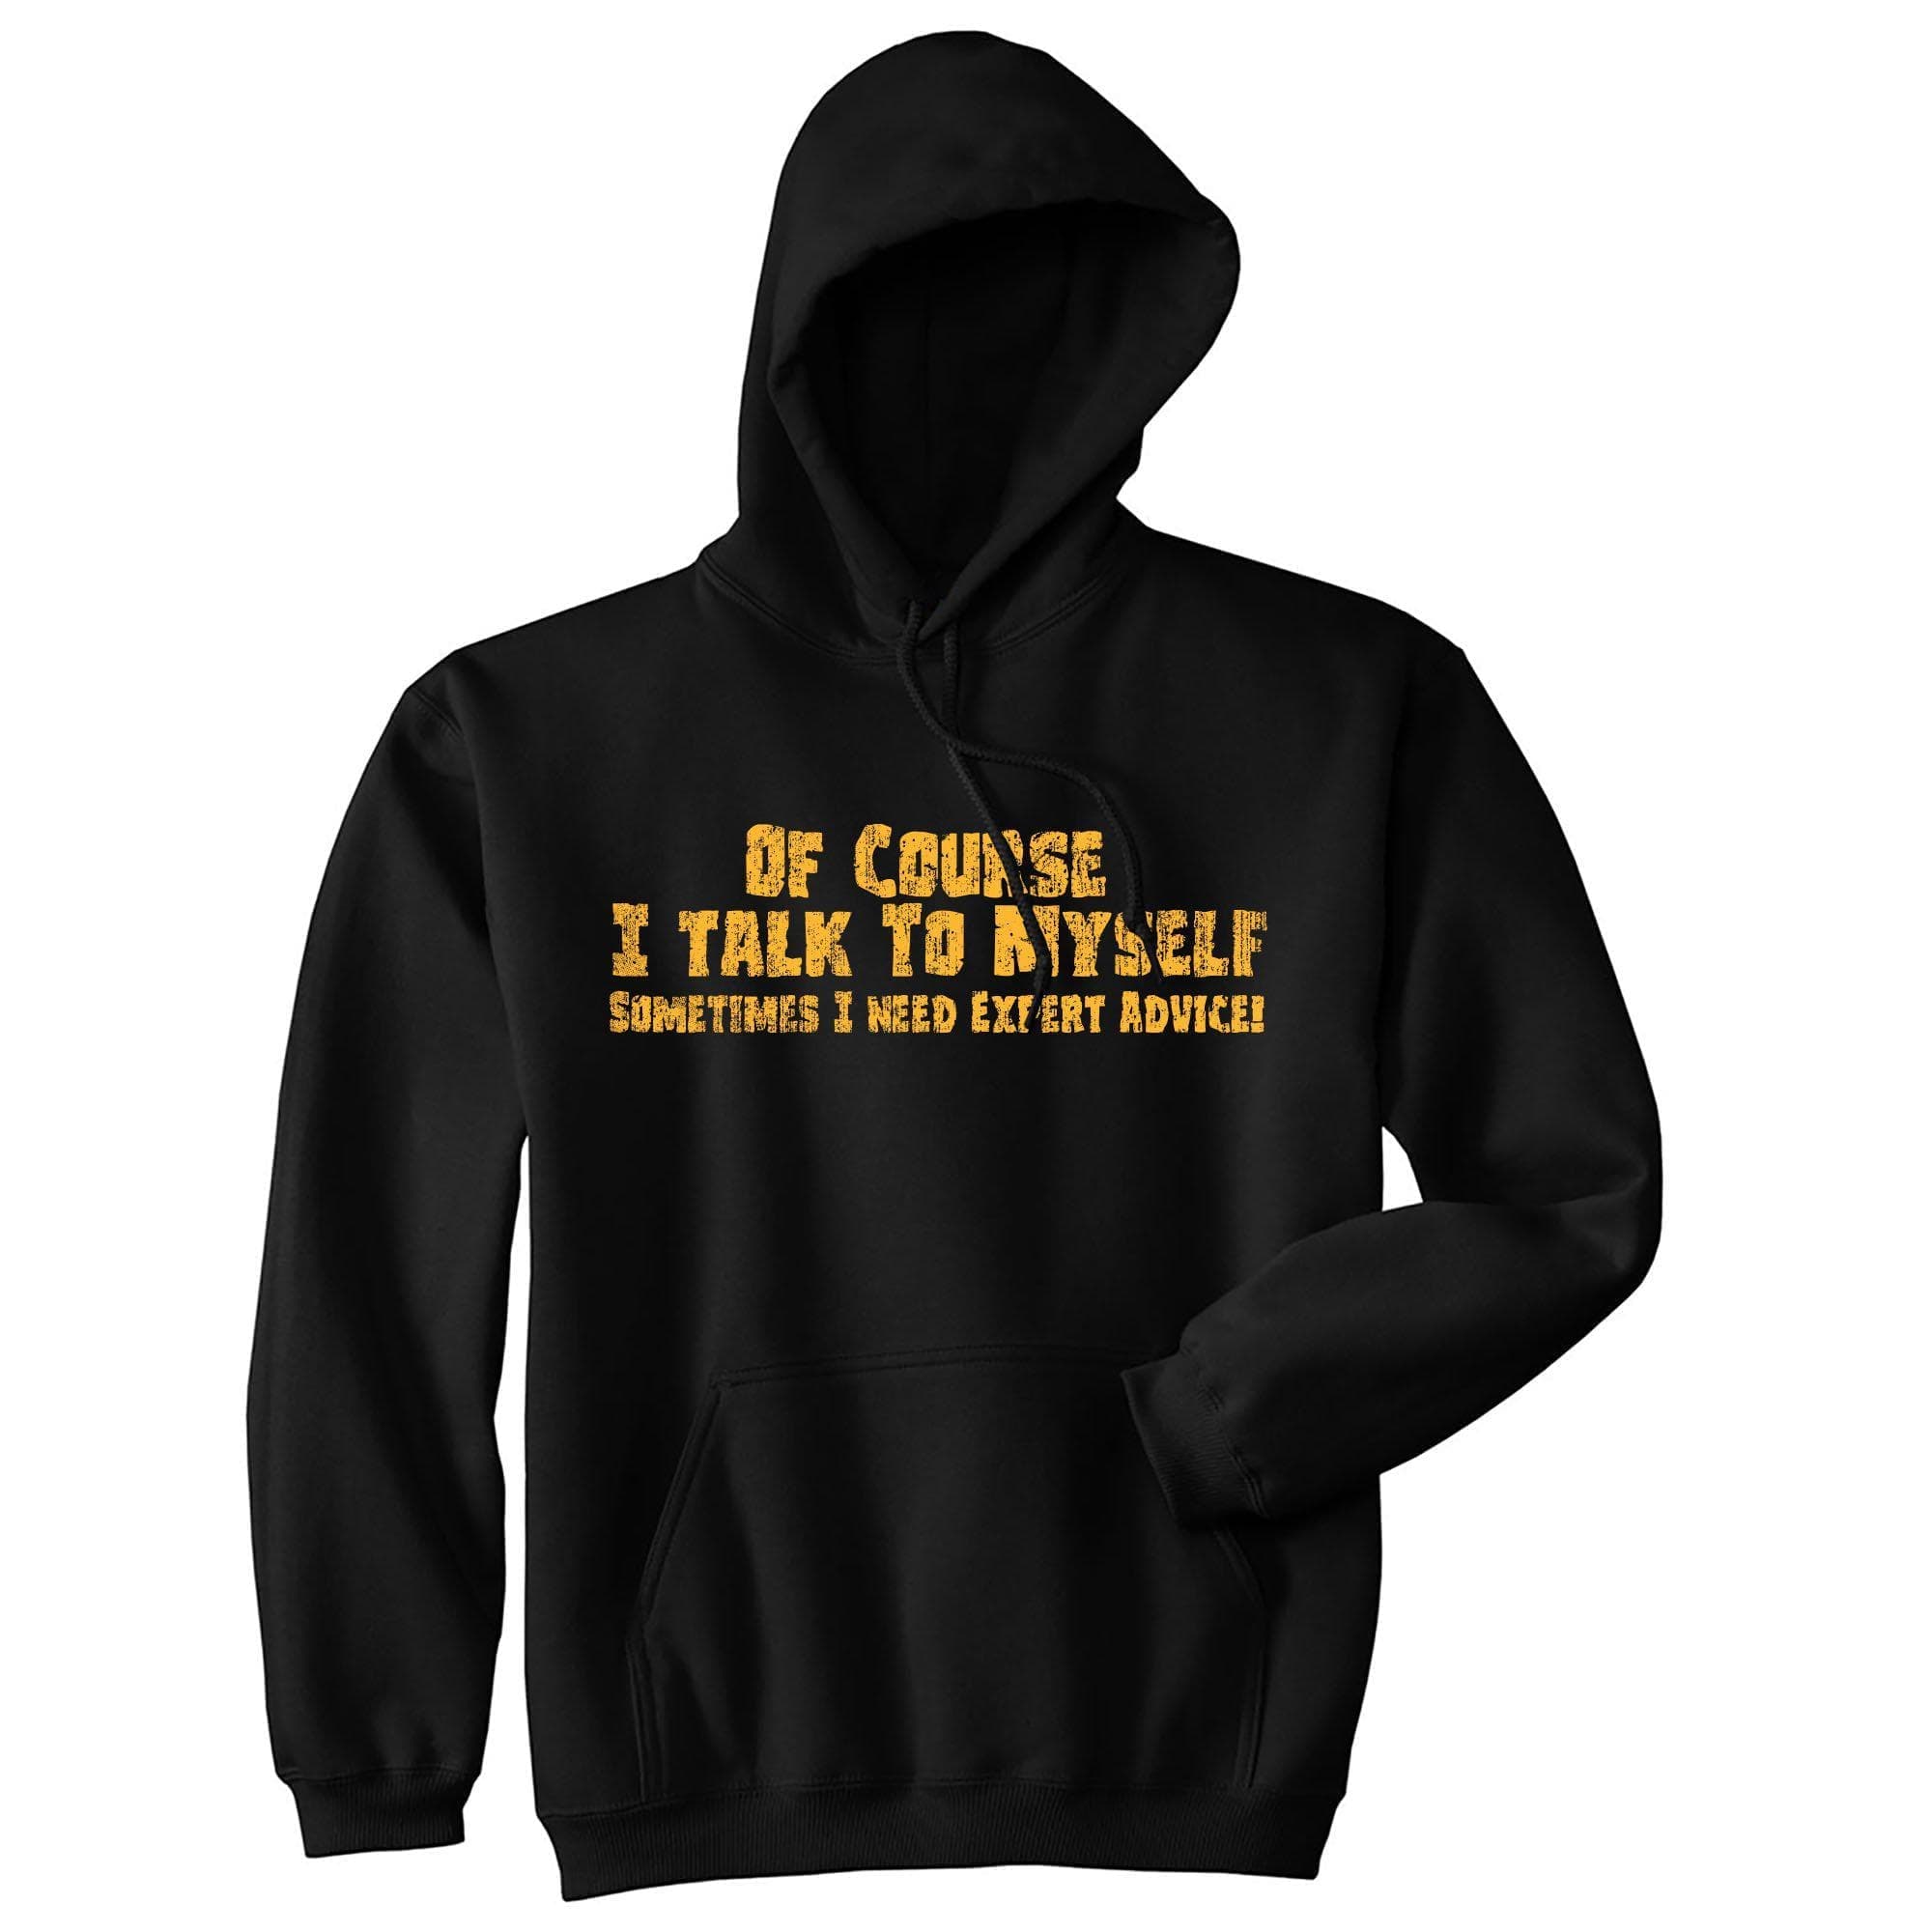 Of Course I Talk To Myself Sometimes I Need Expert Advice Hoodie - Crazy Dog T-Shirts